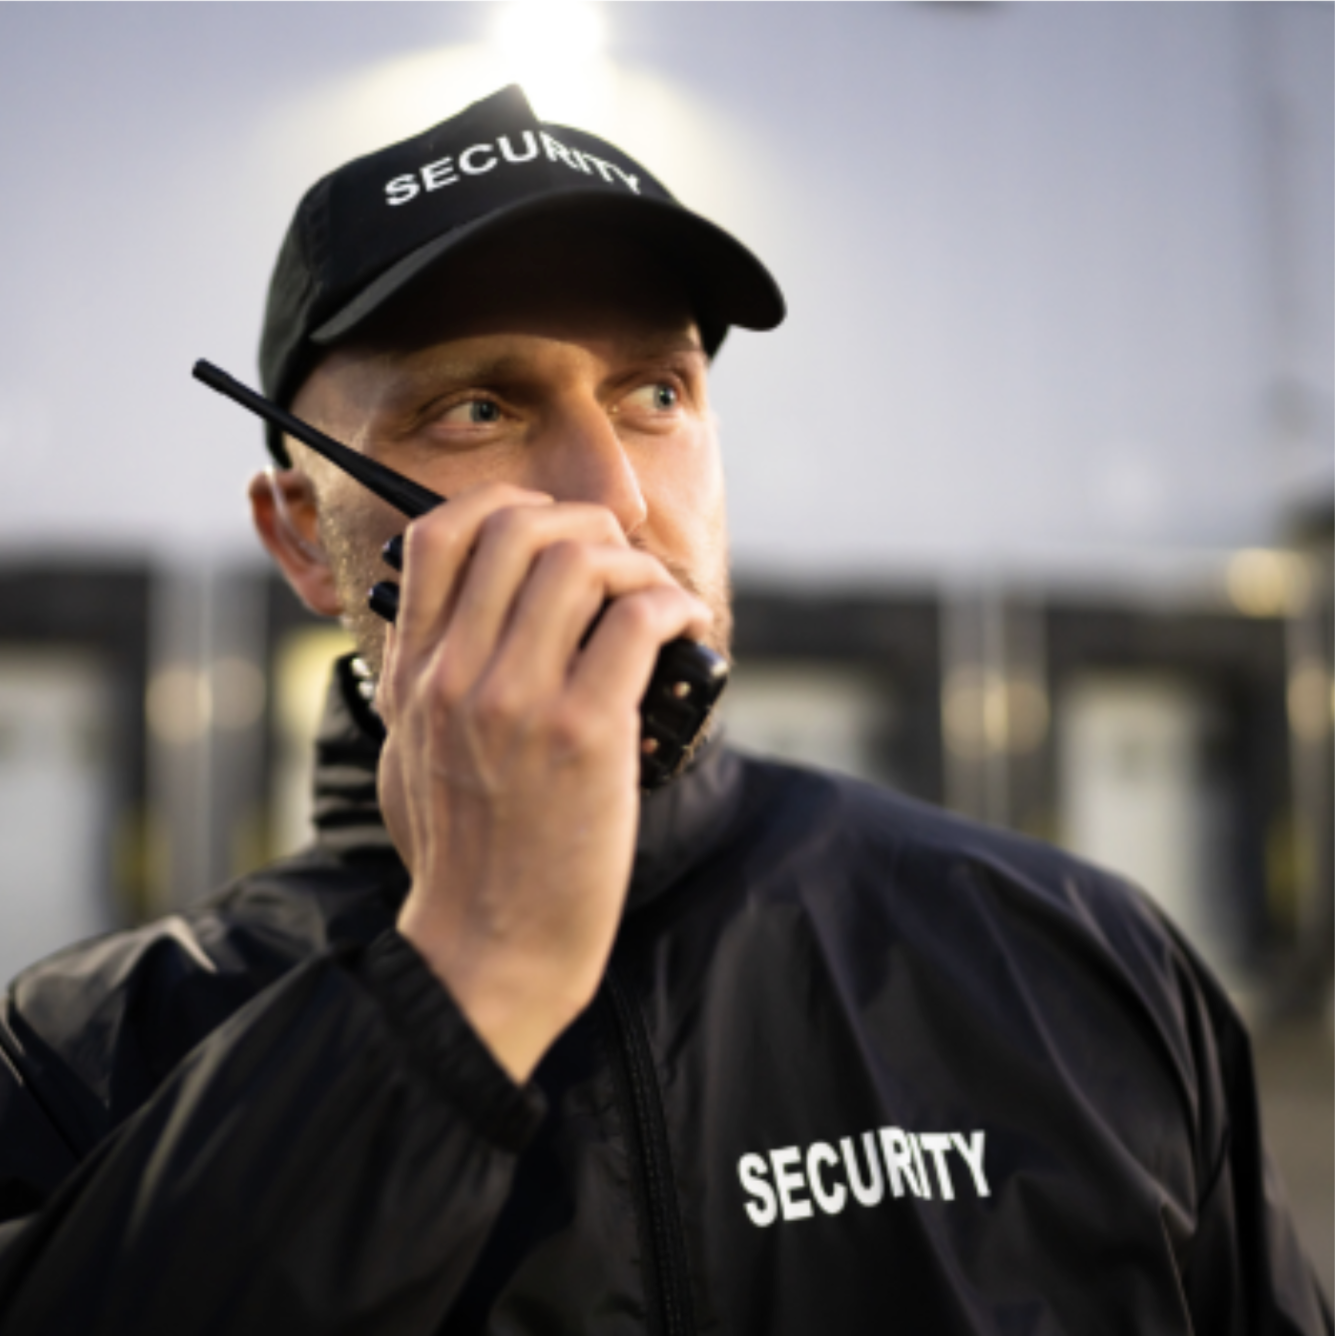 Seattle Security Company- Your Trusted Solution for Security Services